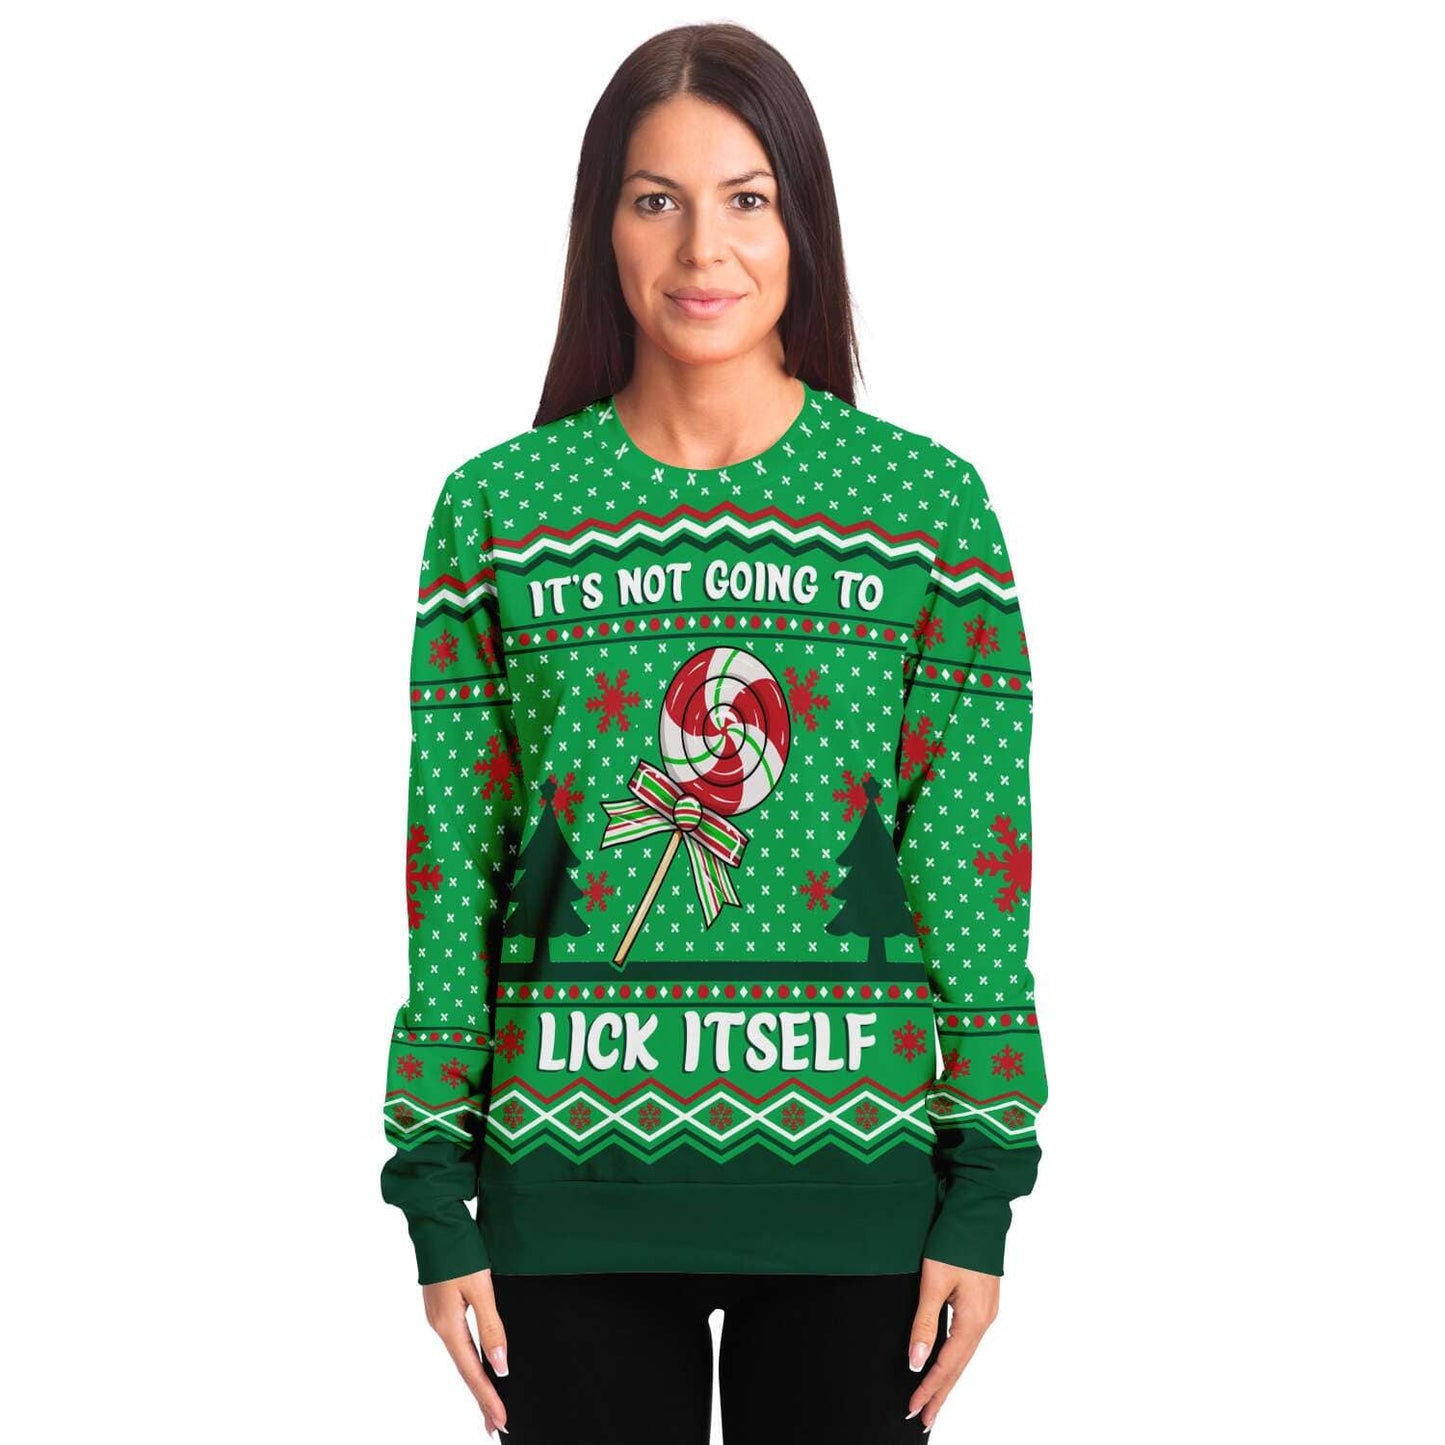 It's Not Going to Lick Itself - Funny Inappropriate Ugly Christmas Sweater (Sweatshirt)